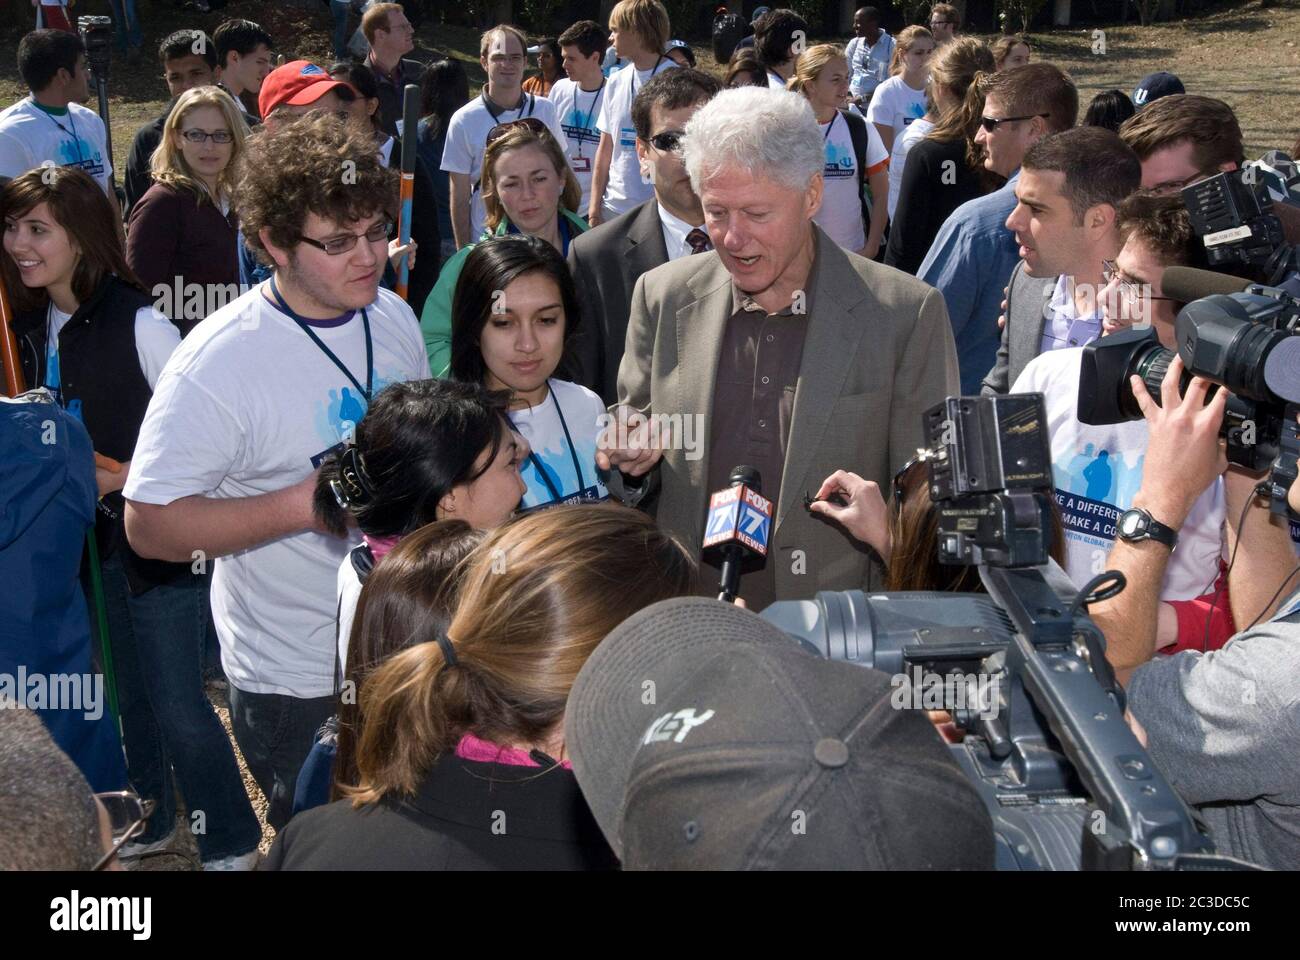 Austin, Texas USA, February 15, 2009: College students gather around former President Bill Clinton (center) at Rosewood Park in East Austin. The student volunteers were working on maintenance projects at the park as part of the Clinton Global Initiative's community service component. ©Marjorie Kamys Cotera/Daemmrich Photography Stock Photo